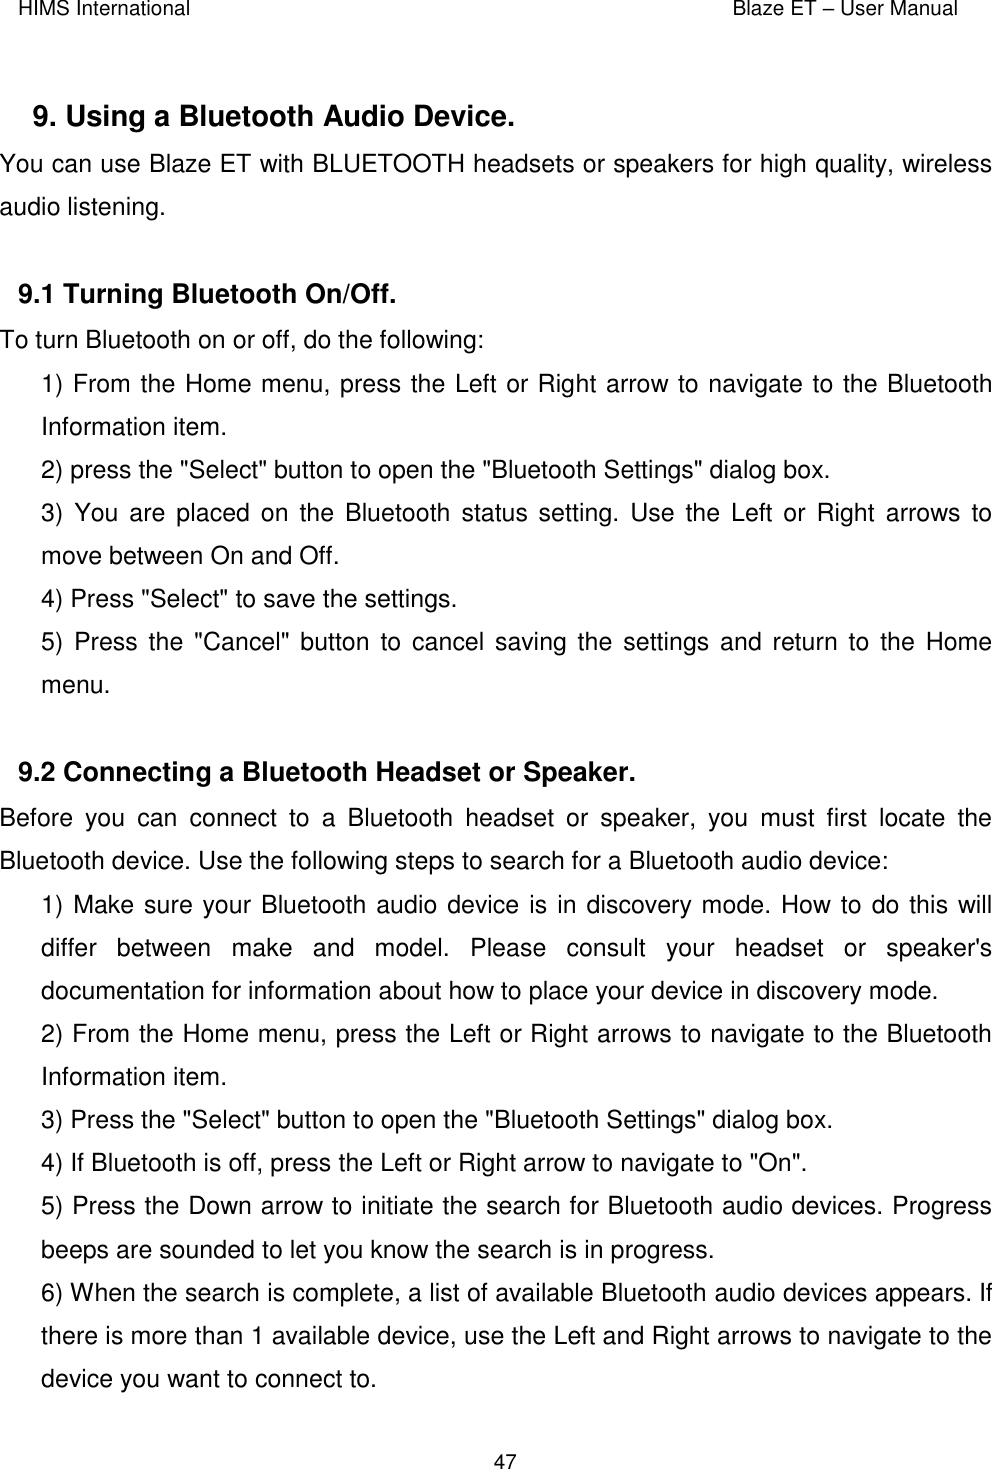 HIMS International    Blaze ET – User Manual      47  9. Using a Bluetooth Audio Device.  You can use Blaze ET with BLUETOOTH headsets or speakers for high quality, wireless audio listening.  9.1 Turning Bluetooth On/Off.  To turn Bluetooth on or off, do the following: 1) From the Home menu, press the Left or Right arrow to navigate to the Bluetooth Information item. 2) press the &quot;Select&quot; button to open the &quot;Bluetooth Settings&quot; dialog box.  3)  You are placed  on  the Bluetooth  status setting. Use the  Left or Right  arrows to move between On and Off. 4) Press &quot;Select&quot; to save the settings. 5) Press the &quot;Cancel&quot;  button to cancel  saving the  settings and  return to the  Home menu.  9.2 Connecting a Bluetooth Headset or Speaker.  Before  you  can  connect  to  a  Bluetooth  headset  or  speaker,  you  must  first  locate  the Bluetooth device. Use the following steps to search for a Bluetooth audio device: 1) Make sure your Bluetooth audio device is in discovery mode. How to do this will differ  between  make  and  model.  Please  consult  your  headset  or  speaker&apos;s documentation for information about how to place your device in discovery mode. 2) From the Home menu, press the Left or Right arrows to navigate to the Bluetooth Information item.  3) Press the &quot;Select&quot; button to open the &quot;Bluetooth Settings&quot; dialog box.   4) If Bluetooth is off, press the Left or Right arrow to navigate to &quot;On&quot;. 5) Press the Down arrow to initiate the search for Bluetooth audio devices. Progress beeps are sounded to let you know the search is in progress.   6) When the search is complete, a list of available Bluetooth audio devices appears. If there is more than 1 available device, use the Left and Right arrows to navigate to the device you want to connect to. 